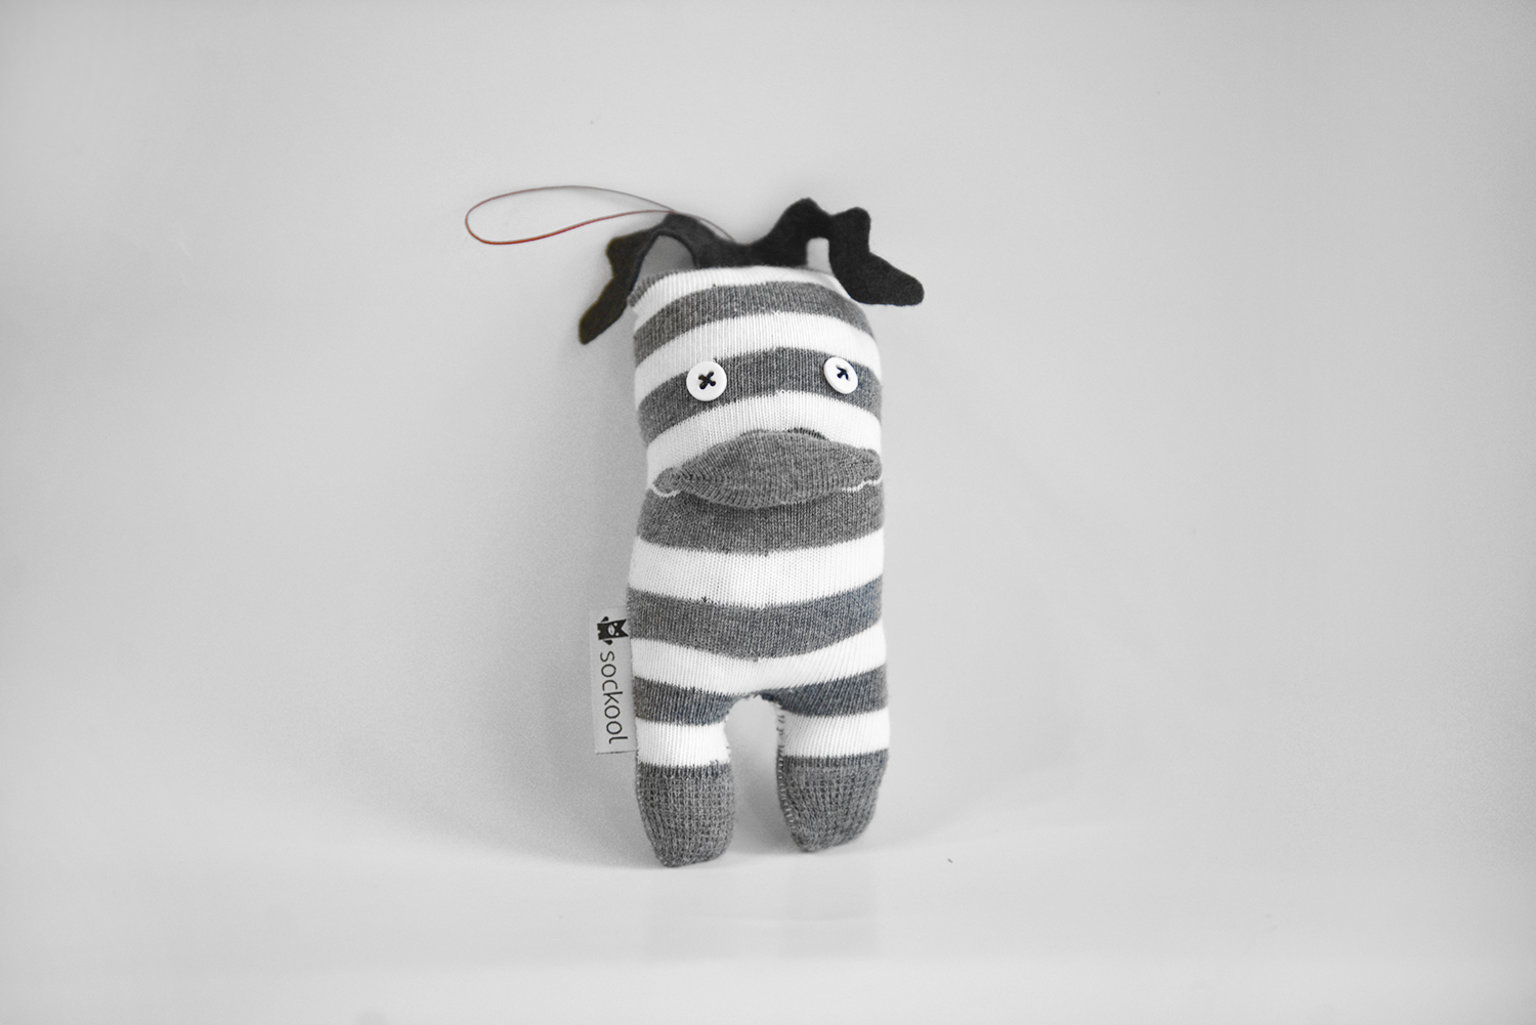 "Pοkο" small soft toy